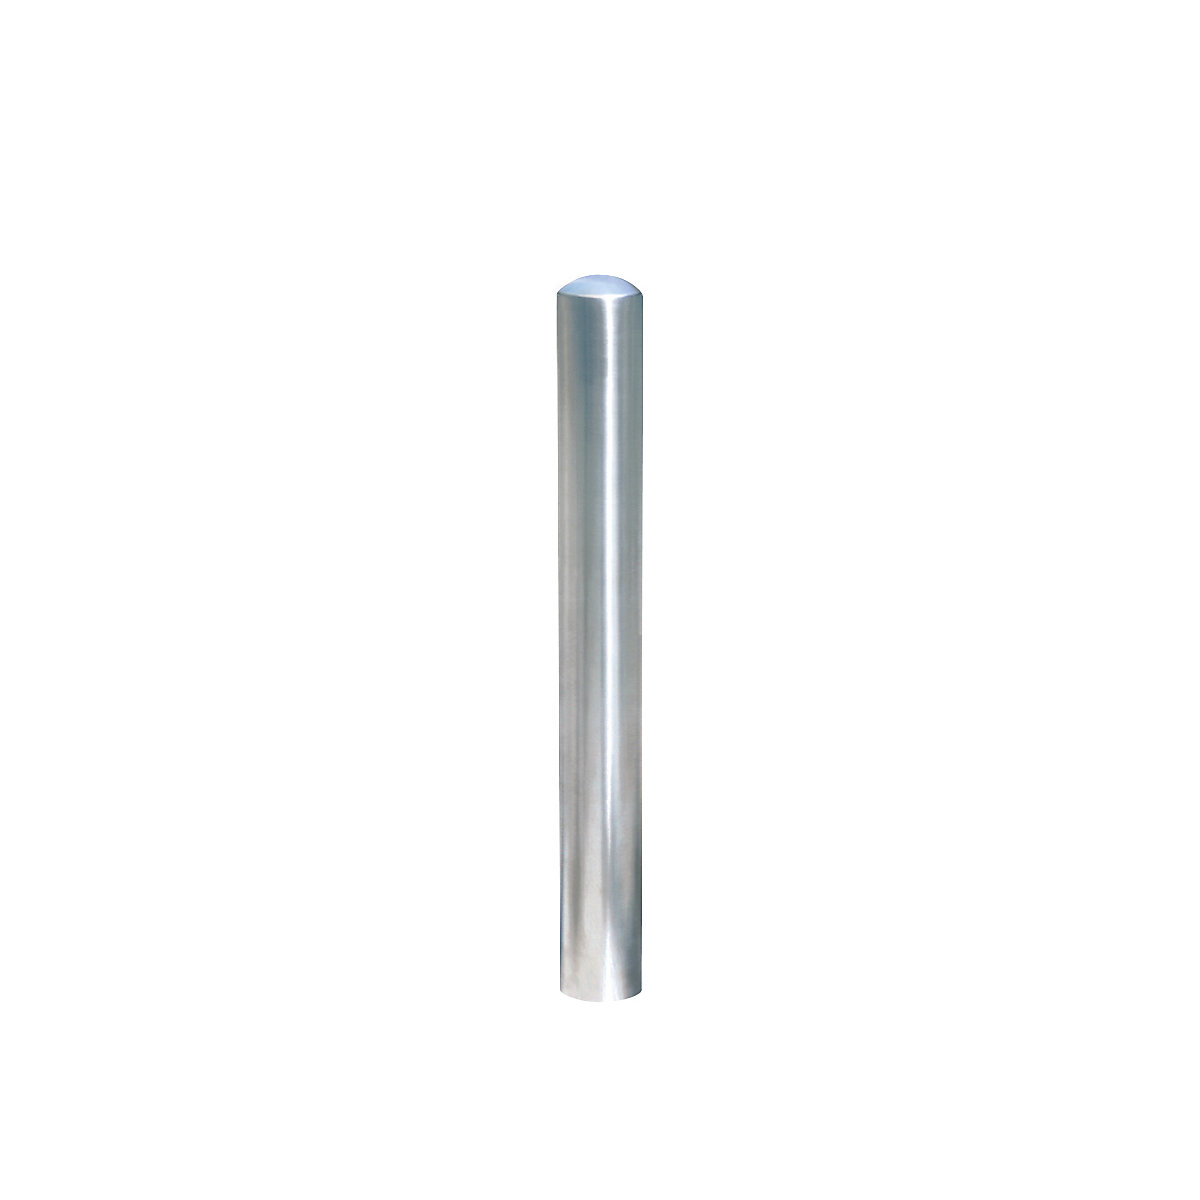 Stainless steel bollard, ground sleeve for removal, with triangle lock, Ø 108 mm-4